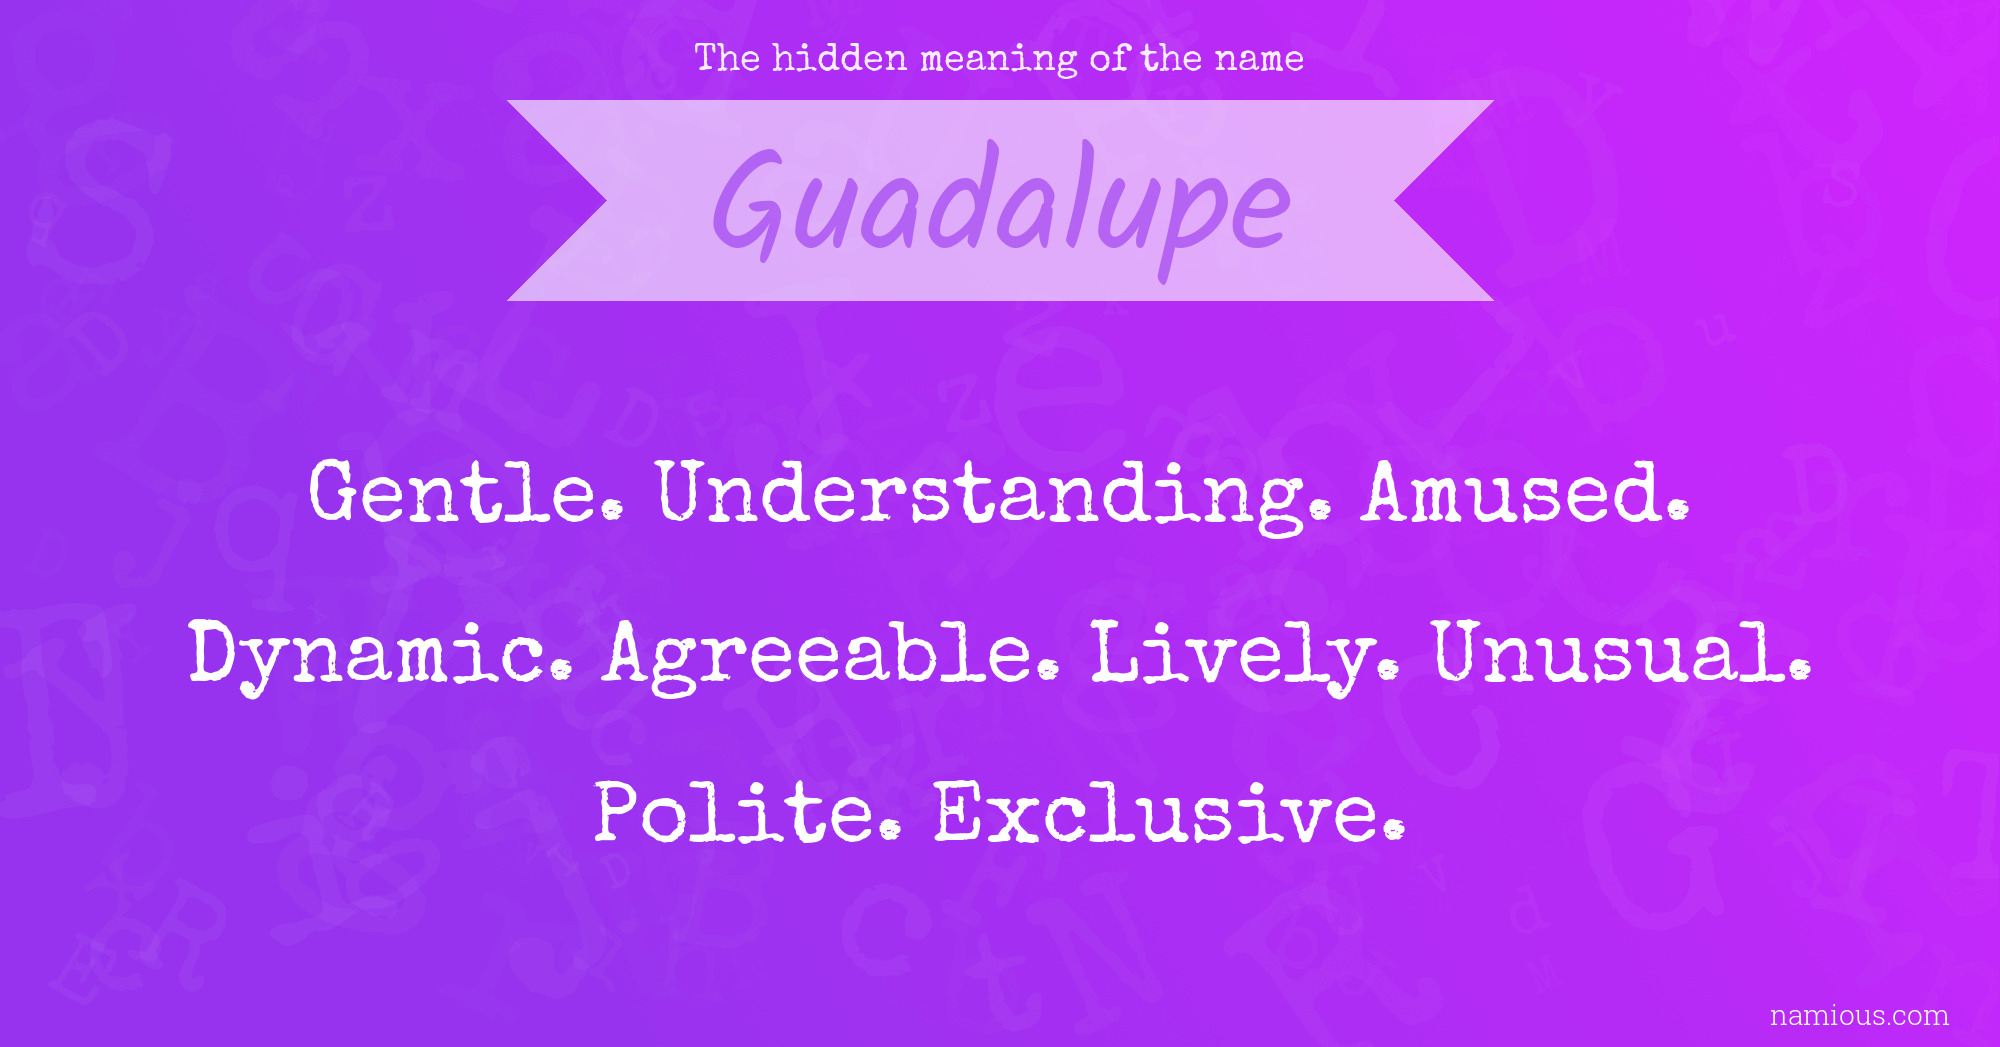 The hidden meaning of the name Guadalupe